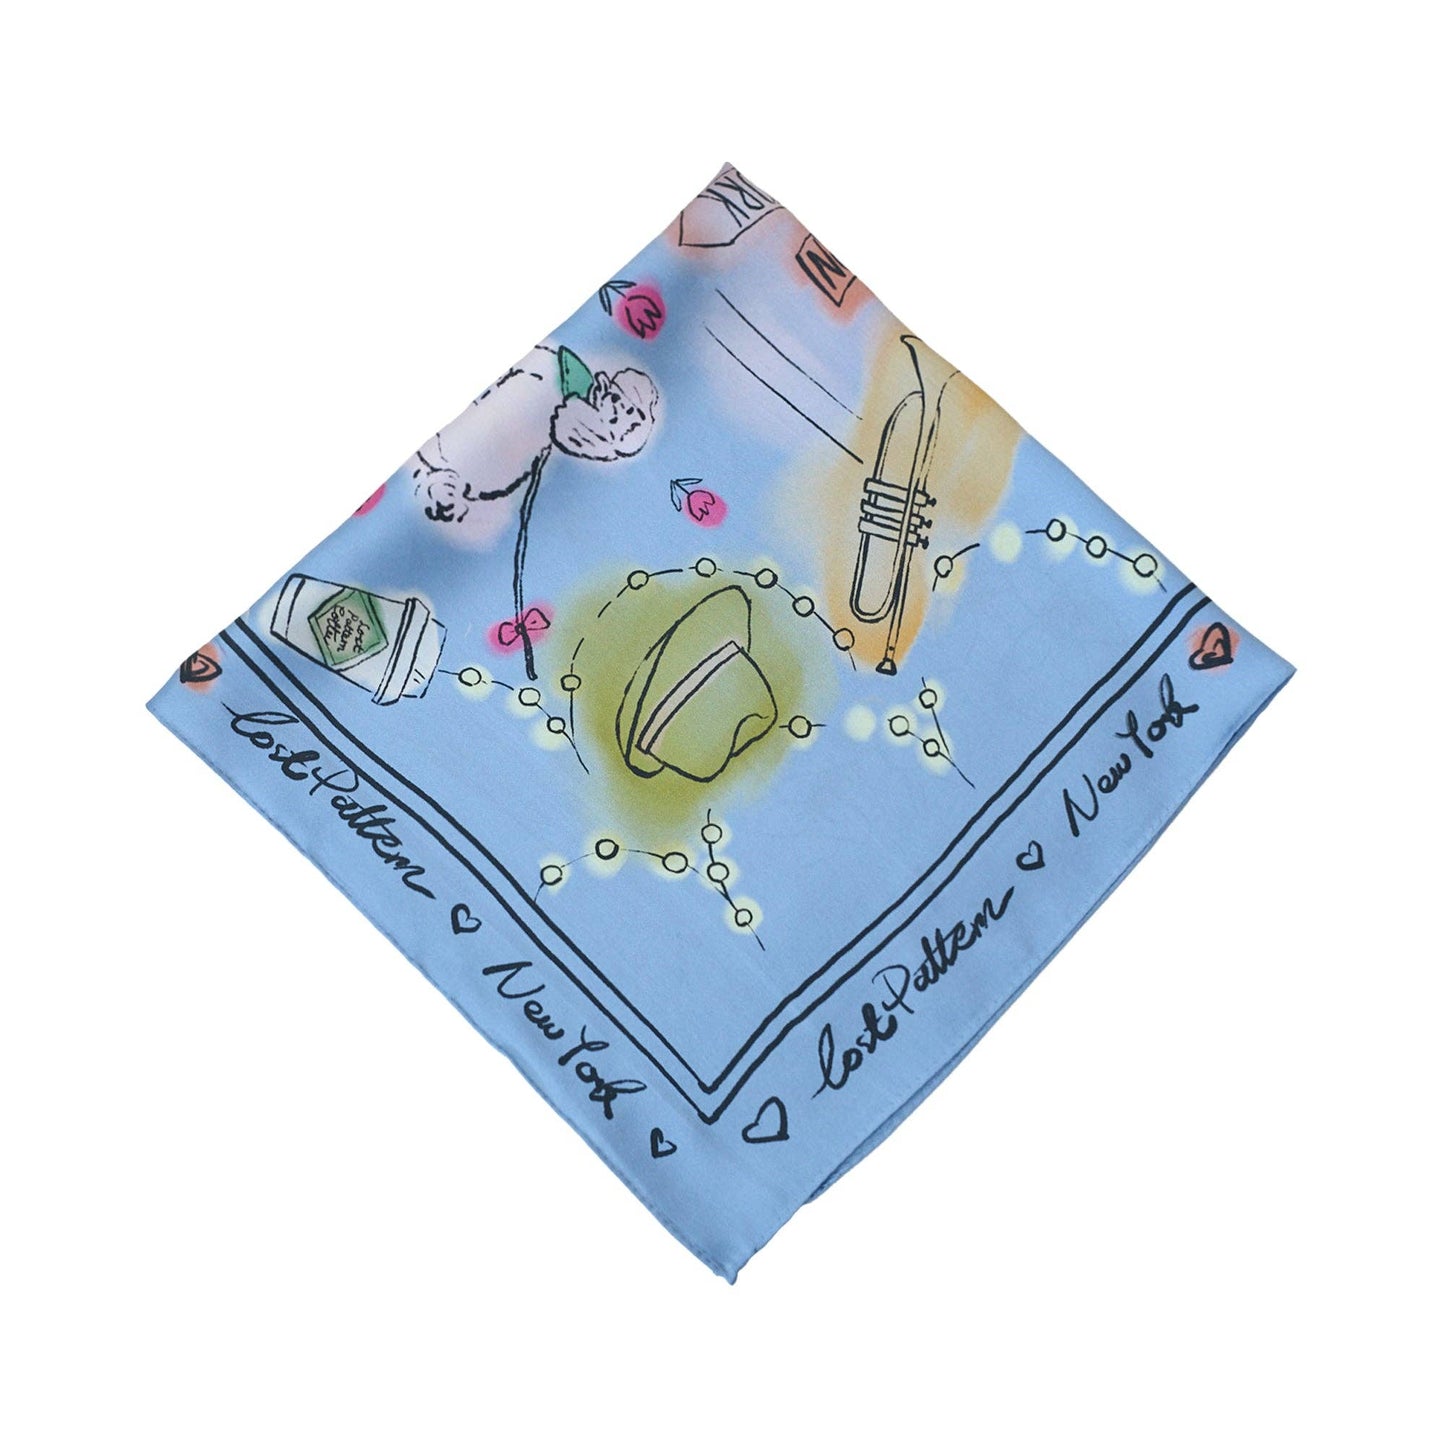 Lost Pattern NYC - "New York in Sketches" Silk Scarf - Blue - Blue